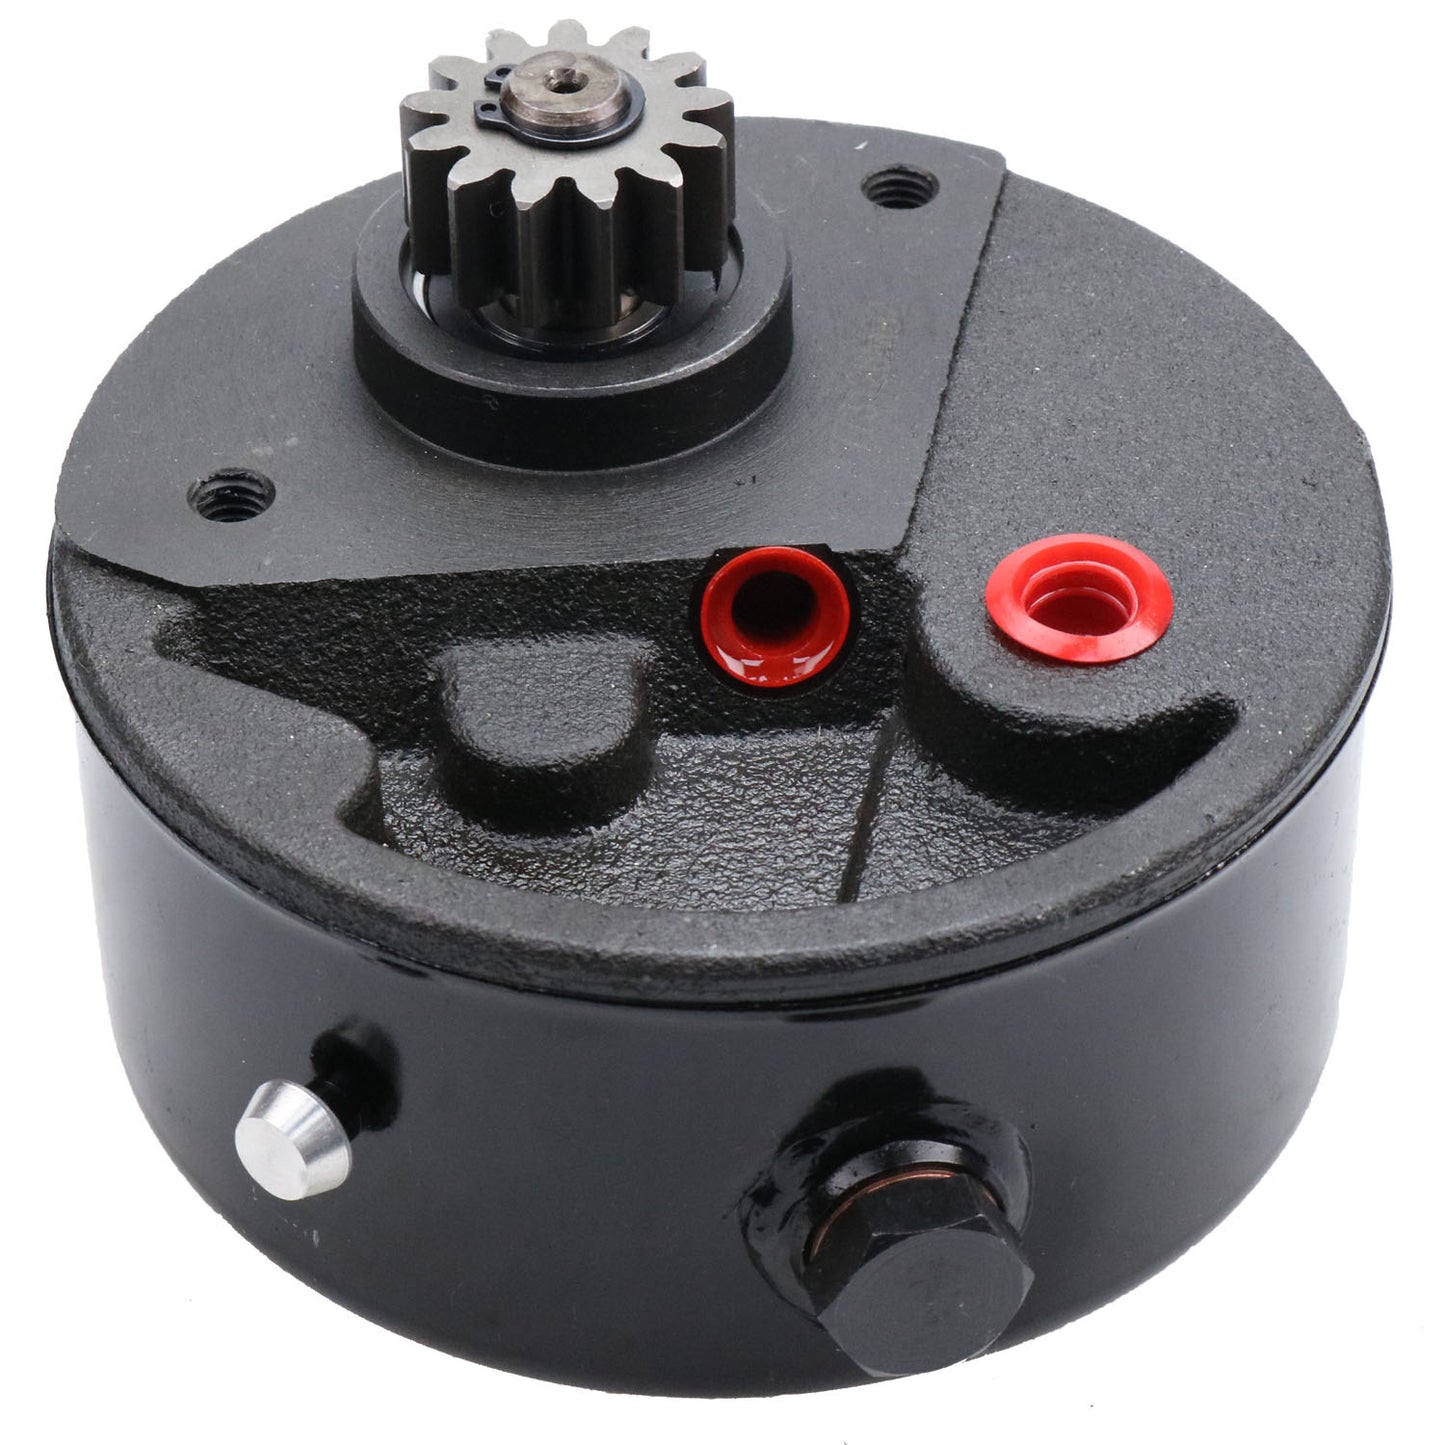 New 773126M92 Power Steering Pump Compatible with Massey Ferguson 230 235 245 250 20 20C 35 50 135 150